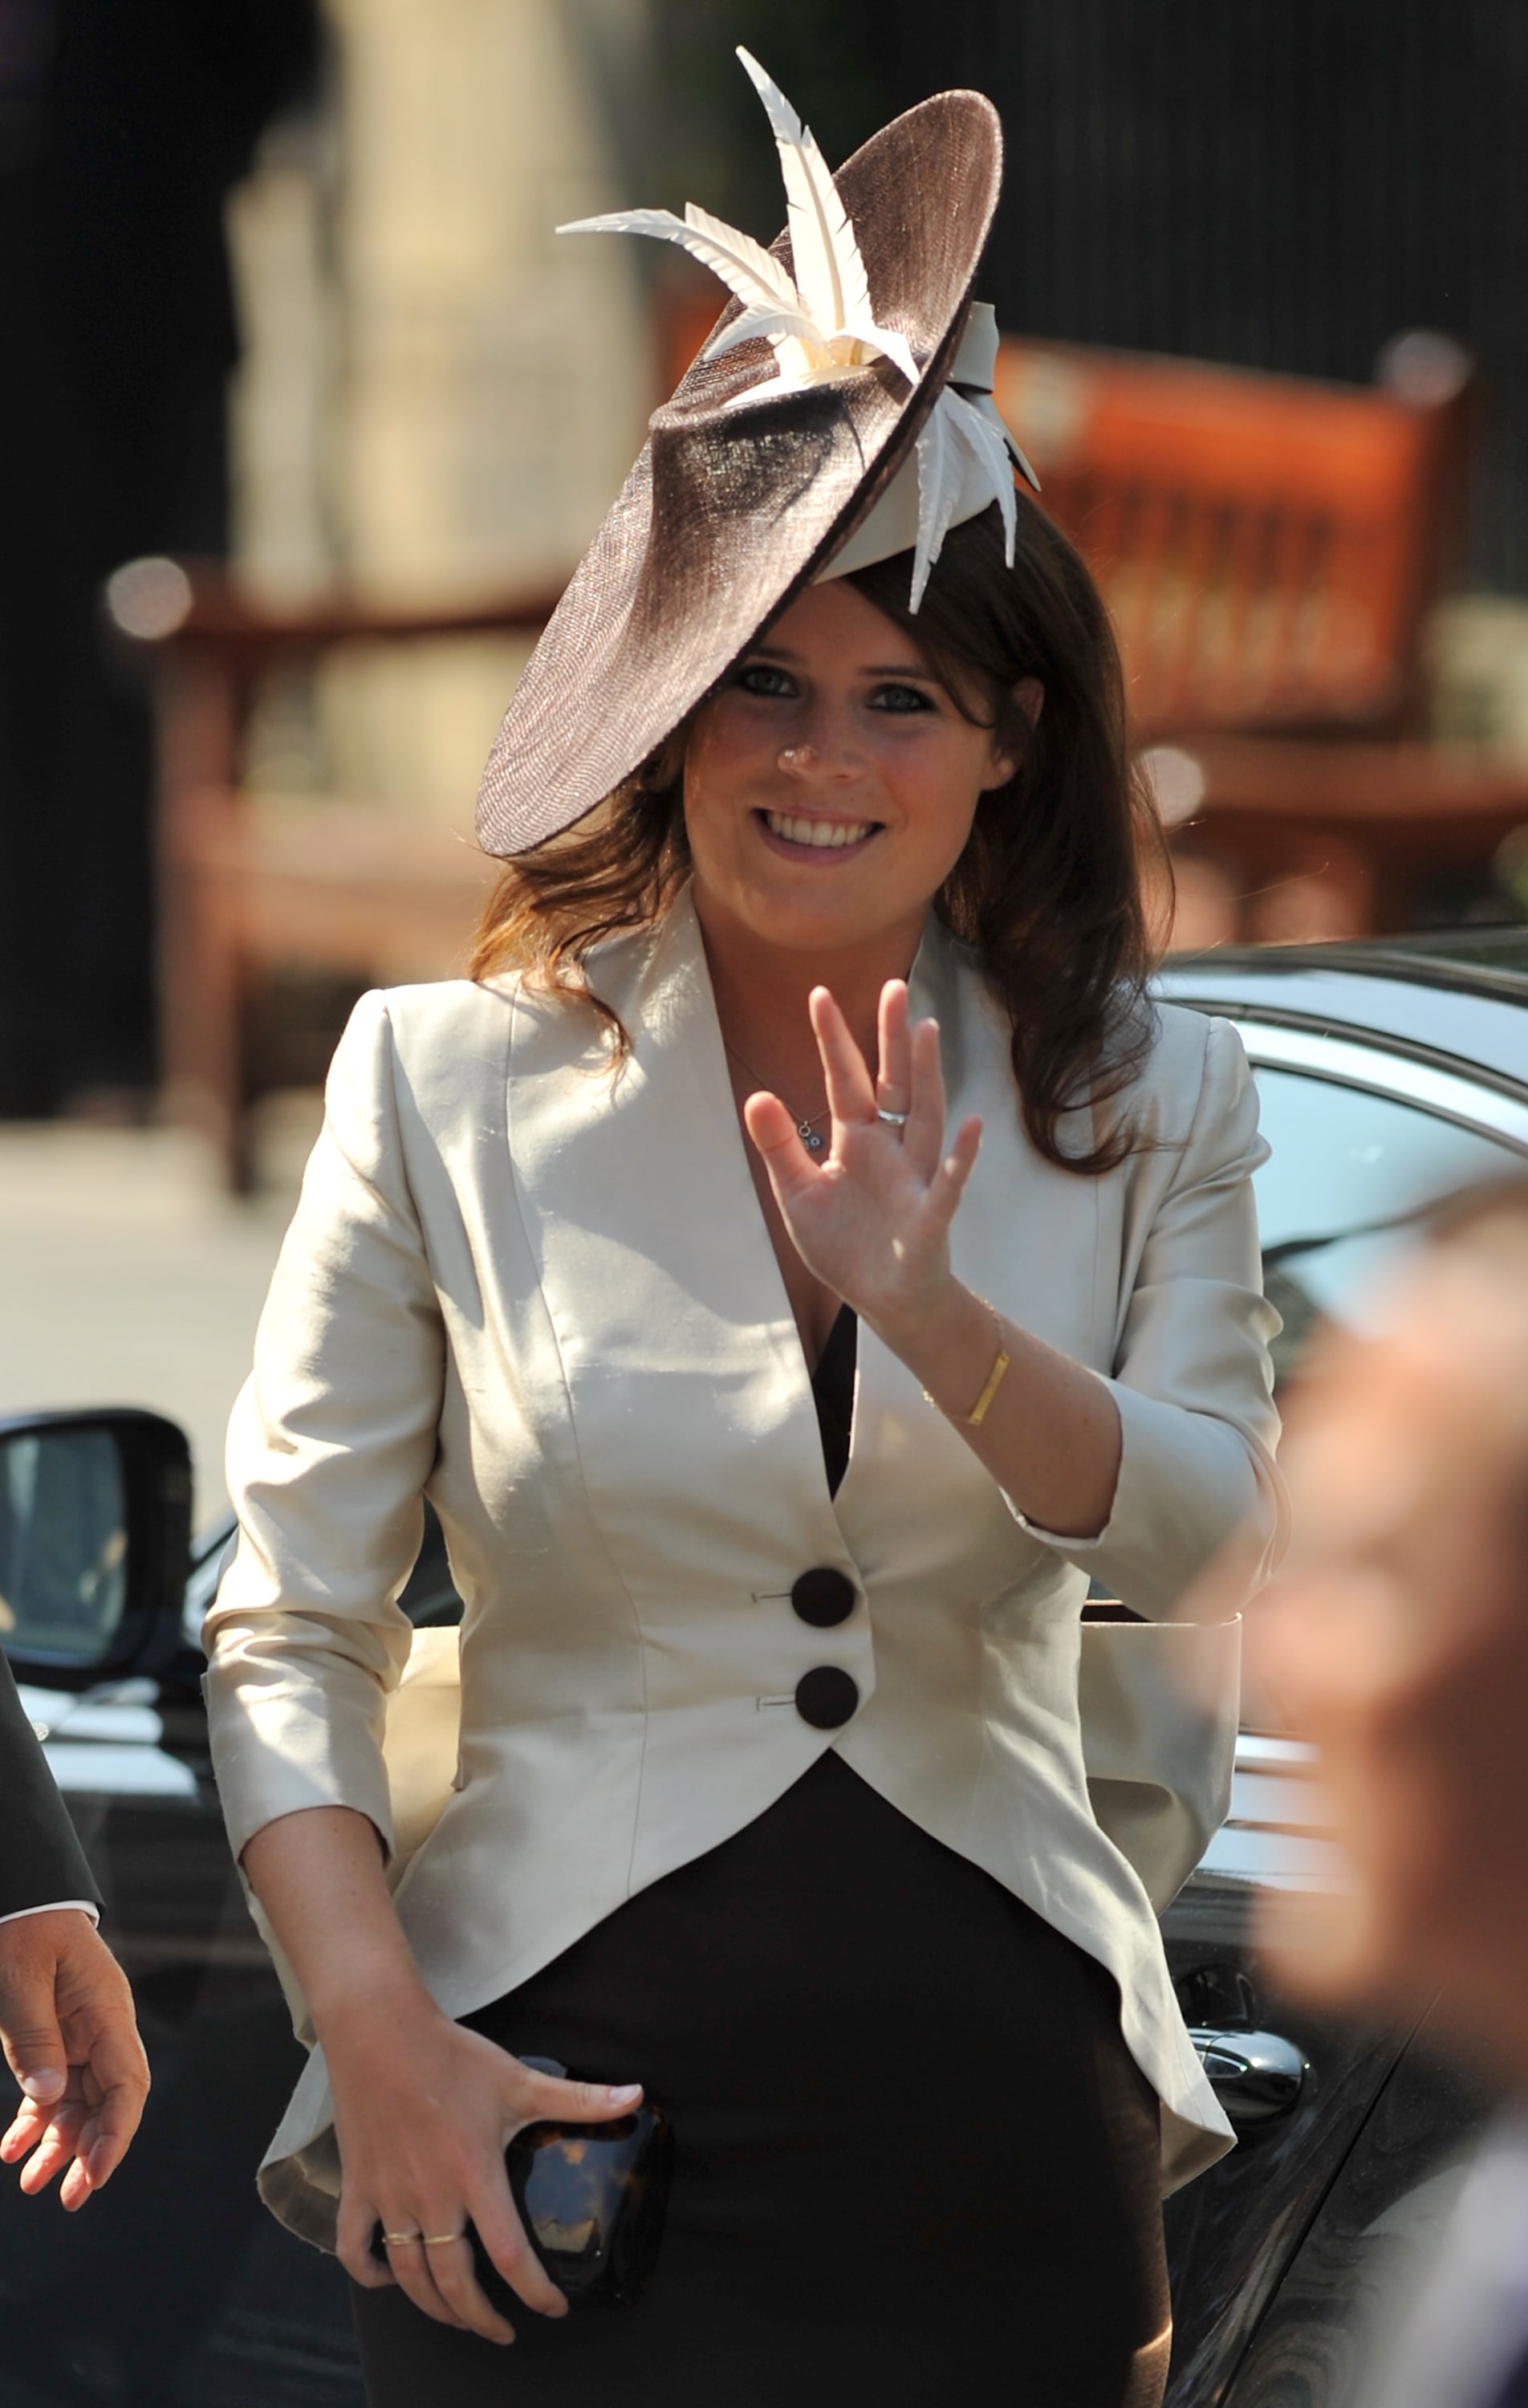 Princess Eugenie arrives for the wedding of Britain's Zara Phillips, granddaughter of Britain's Queen Elizabeth II, and England rugby player Mike Tindall at Canongate Kirk in Edinburgh, Scotland, on July 30, 2011. AFP PHOTO / BEN STANSALL (Photo credit should read BEN STANSALL/AFP/Getty Images)